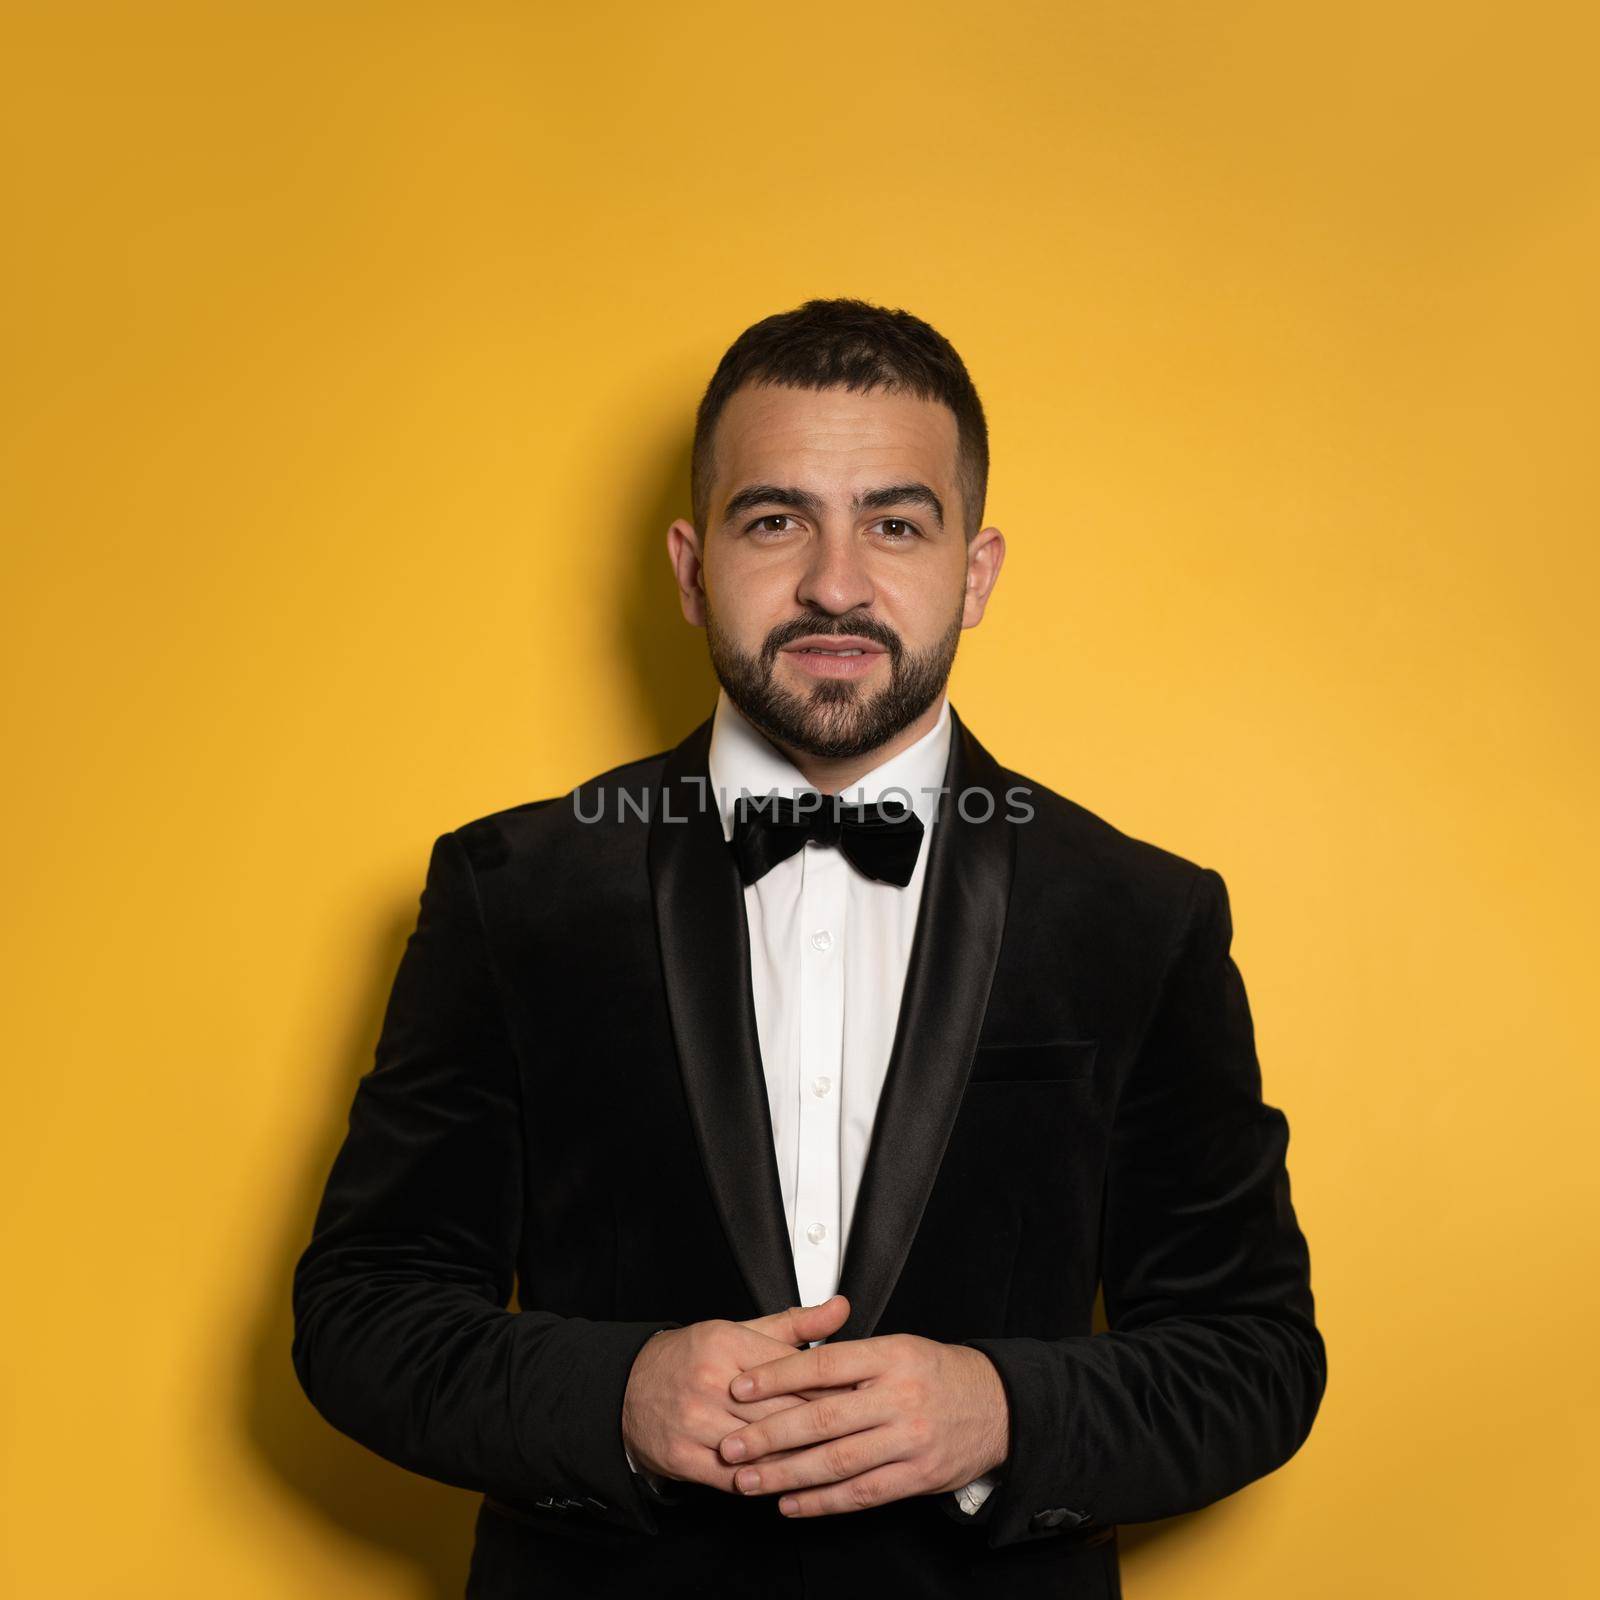 Concentrated handsome man wearing black tuxedo with hands folded looking on camera. Handsome young smiling caucasian man isolated on yellow background. Square crop.